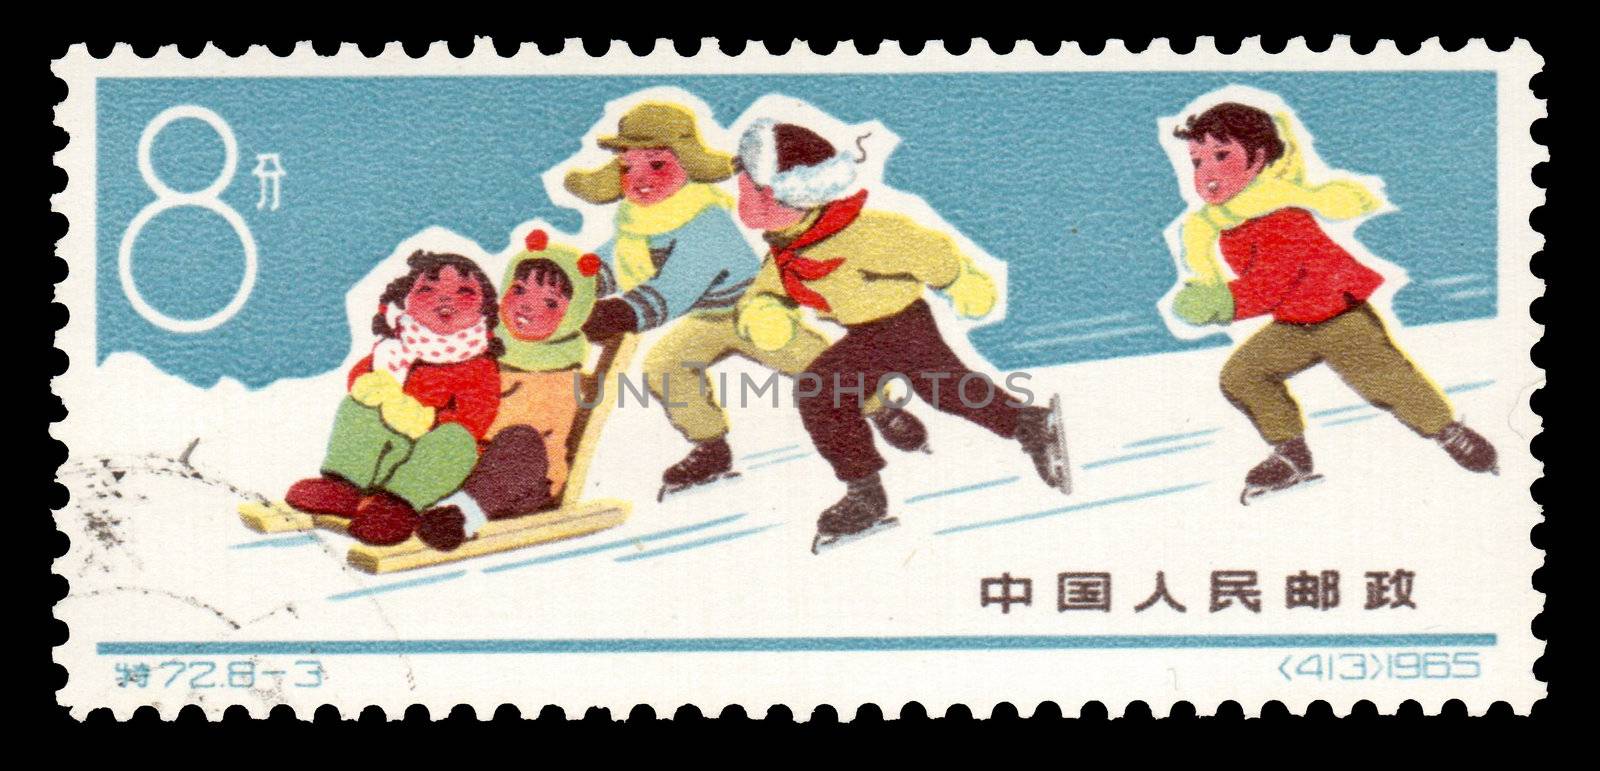 Asia - CIRCA 1965: A postal stamp printed in the Asia which shows Winter Games Children, circa 1965. 